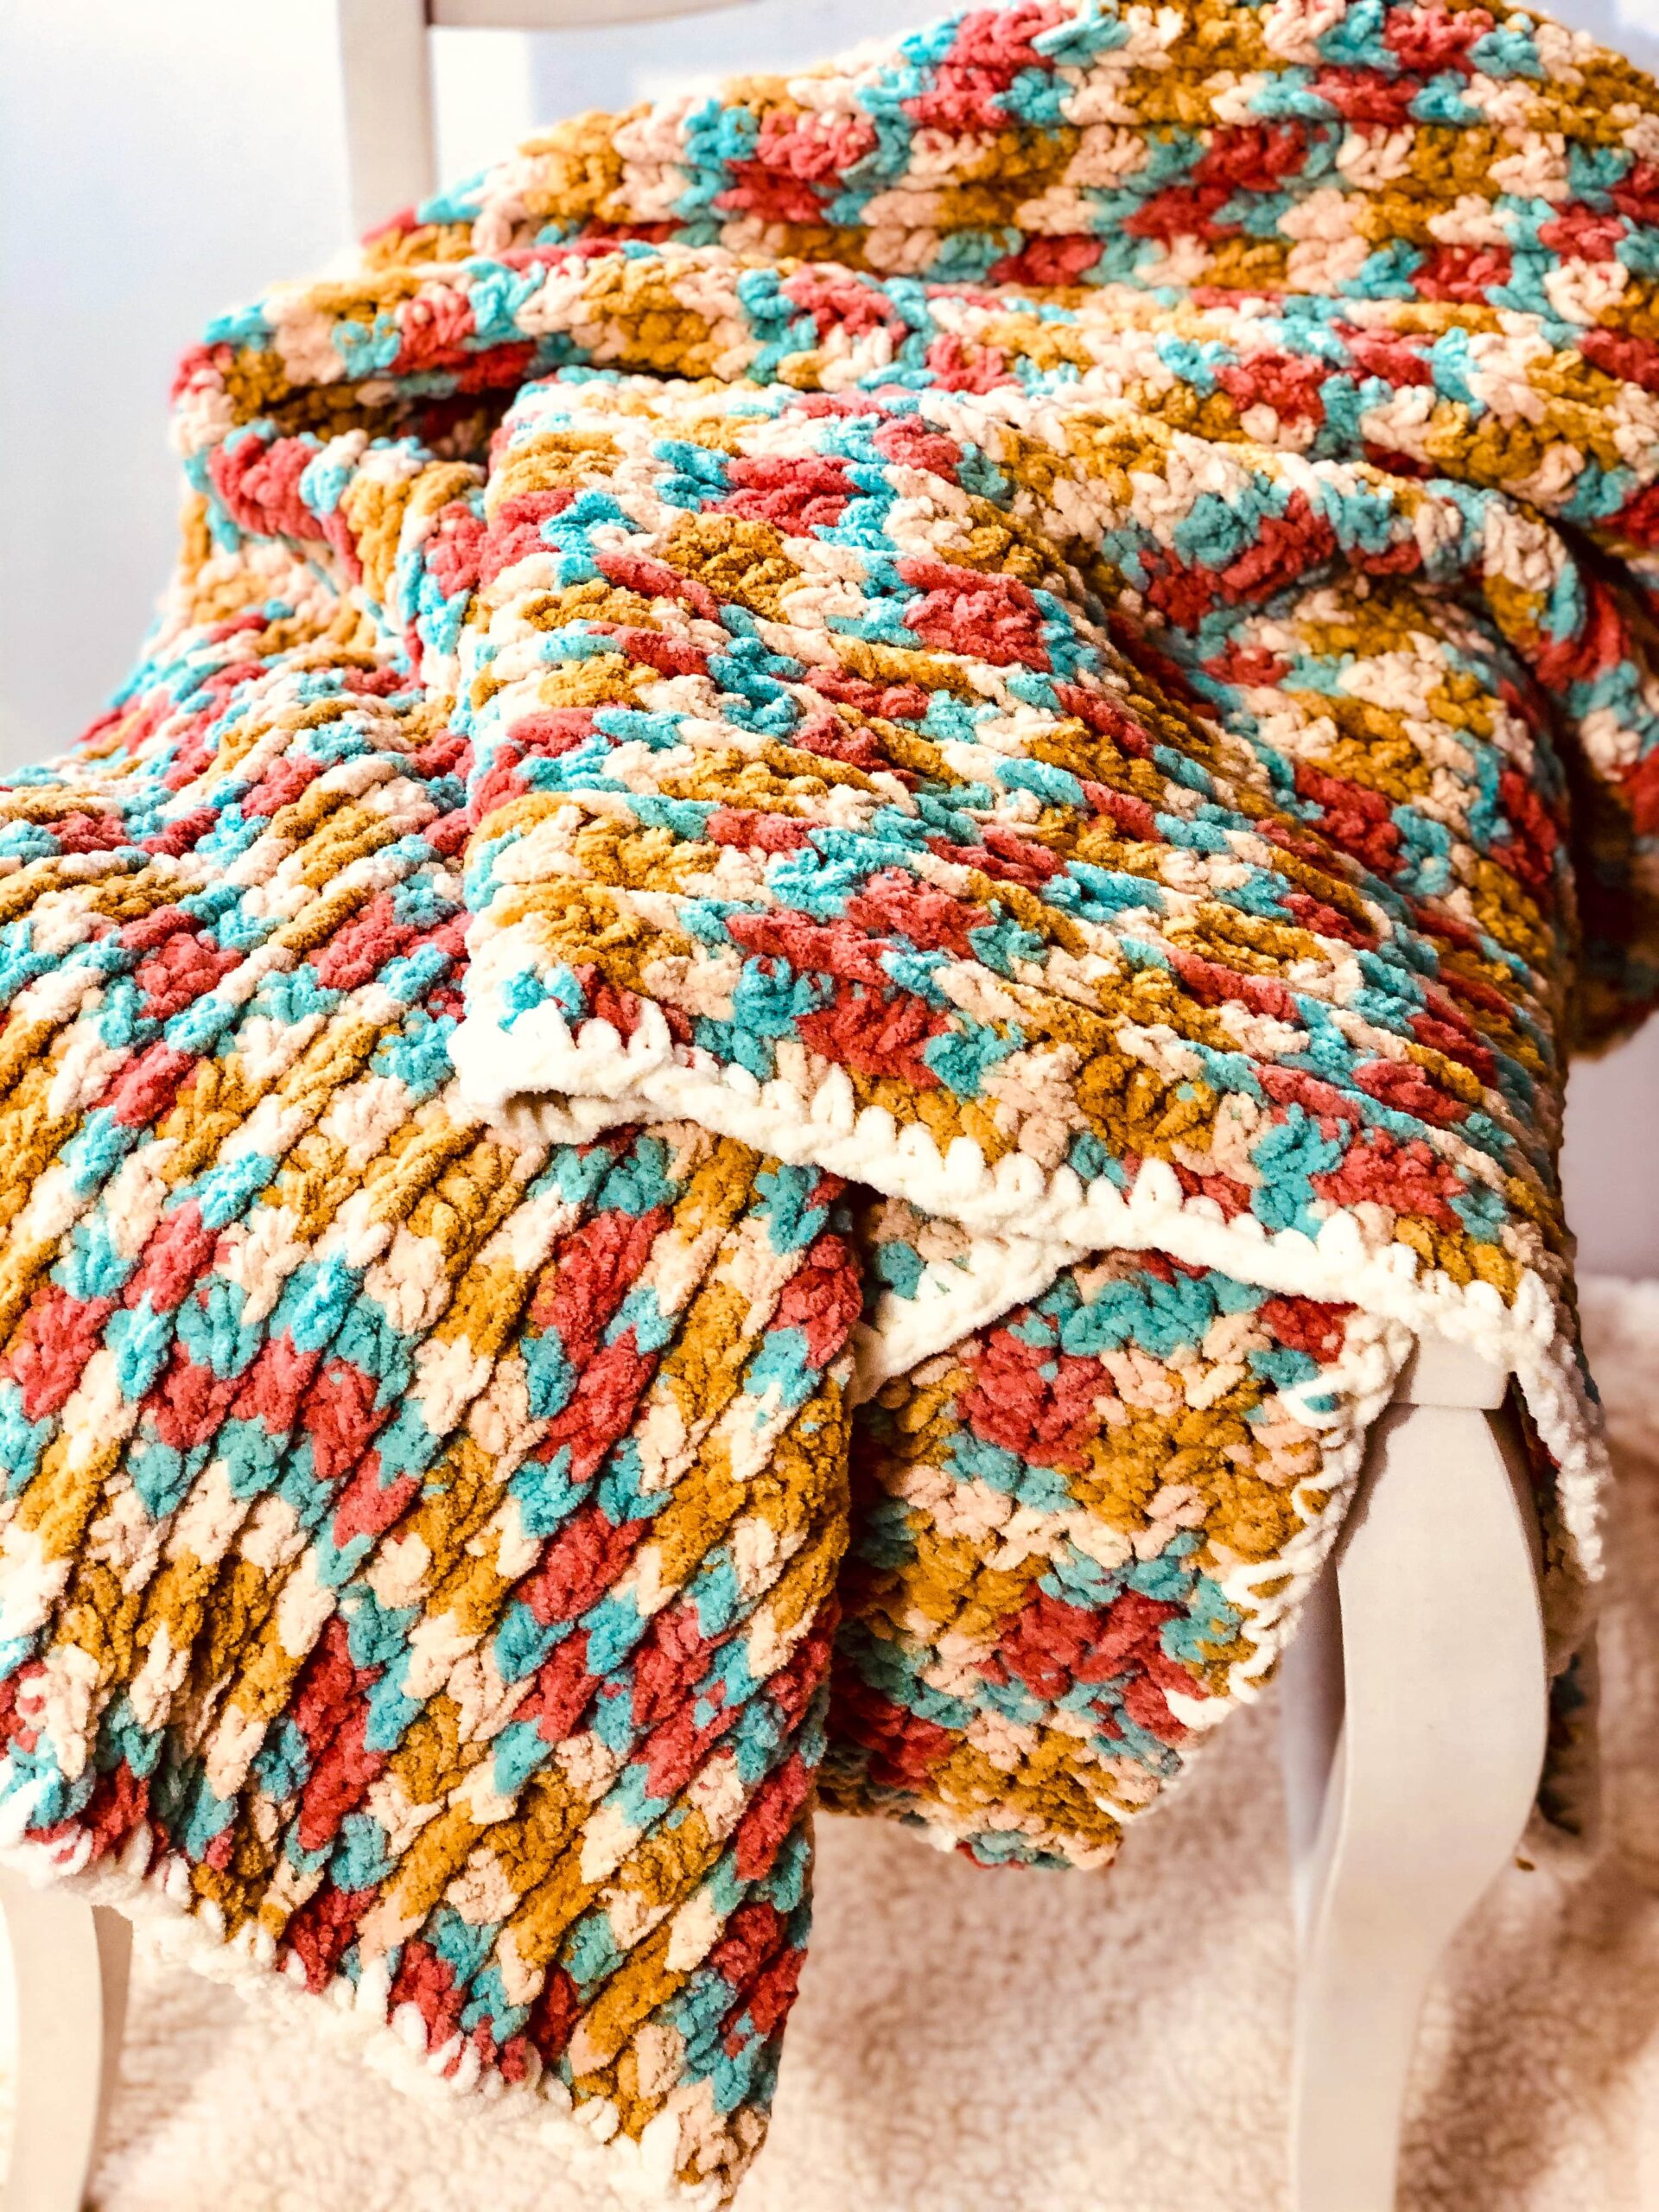 Ly's Blanket: Free Crochet Pattern for a Cozy Chunky Blanket